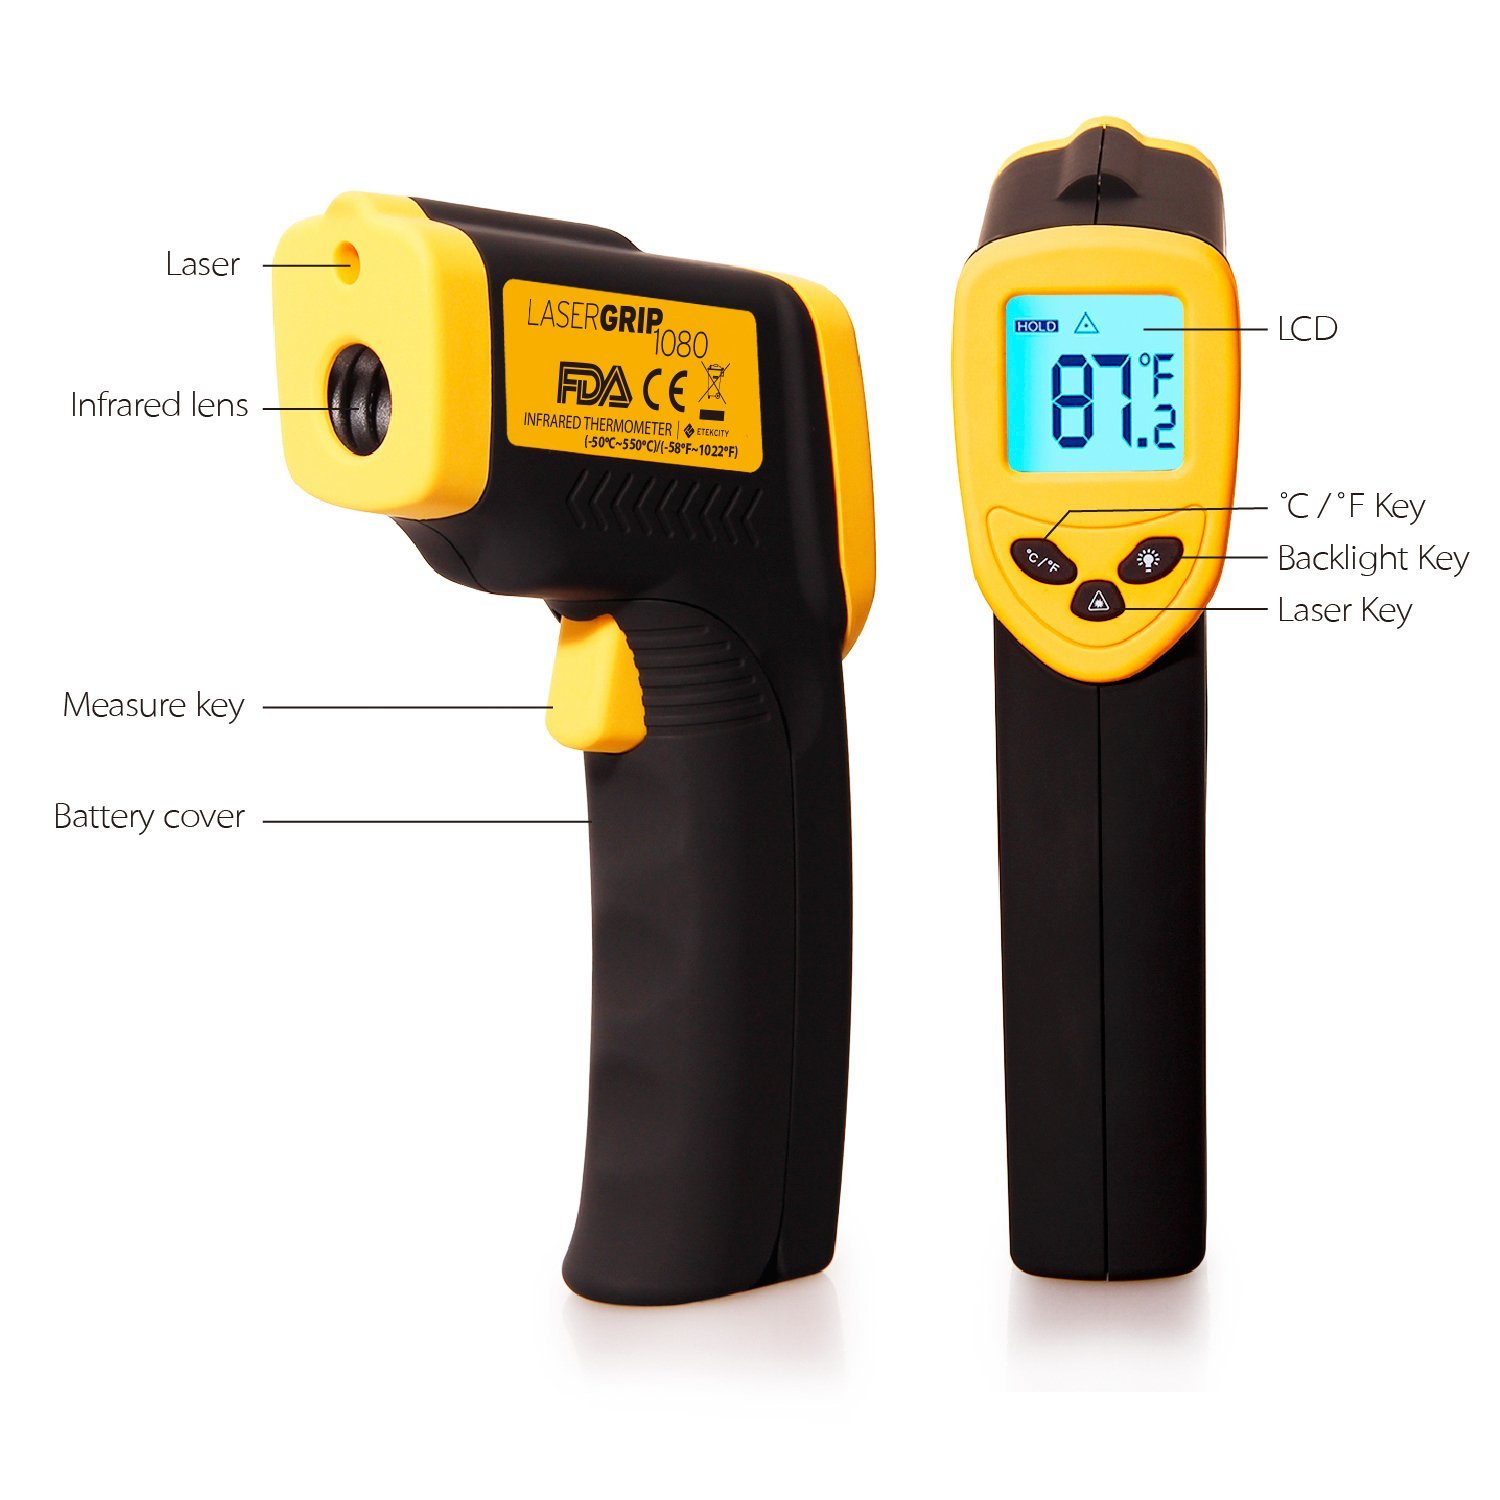 https://buytechzone.com/wp-content/uploads/imported/Etekcity-Lasergrip-1080-ETC-8550-Temperature-Gun-Non-contact-Digital-Laser-Infrared-IR-Thermometer-58-1022F-121-DS-Instant-read-FDAFCCCEROHS-Approved-B00DMI632G-3.jpg